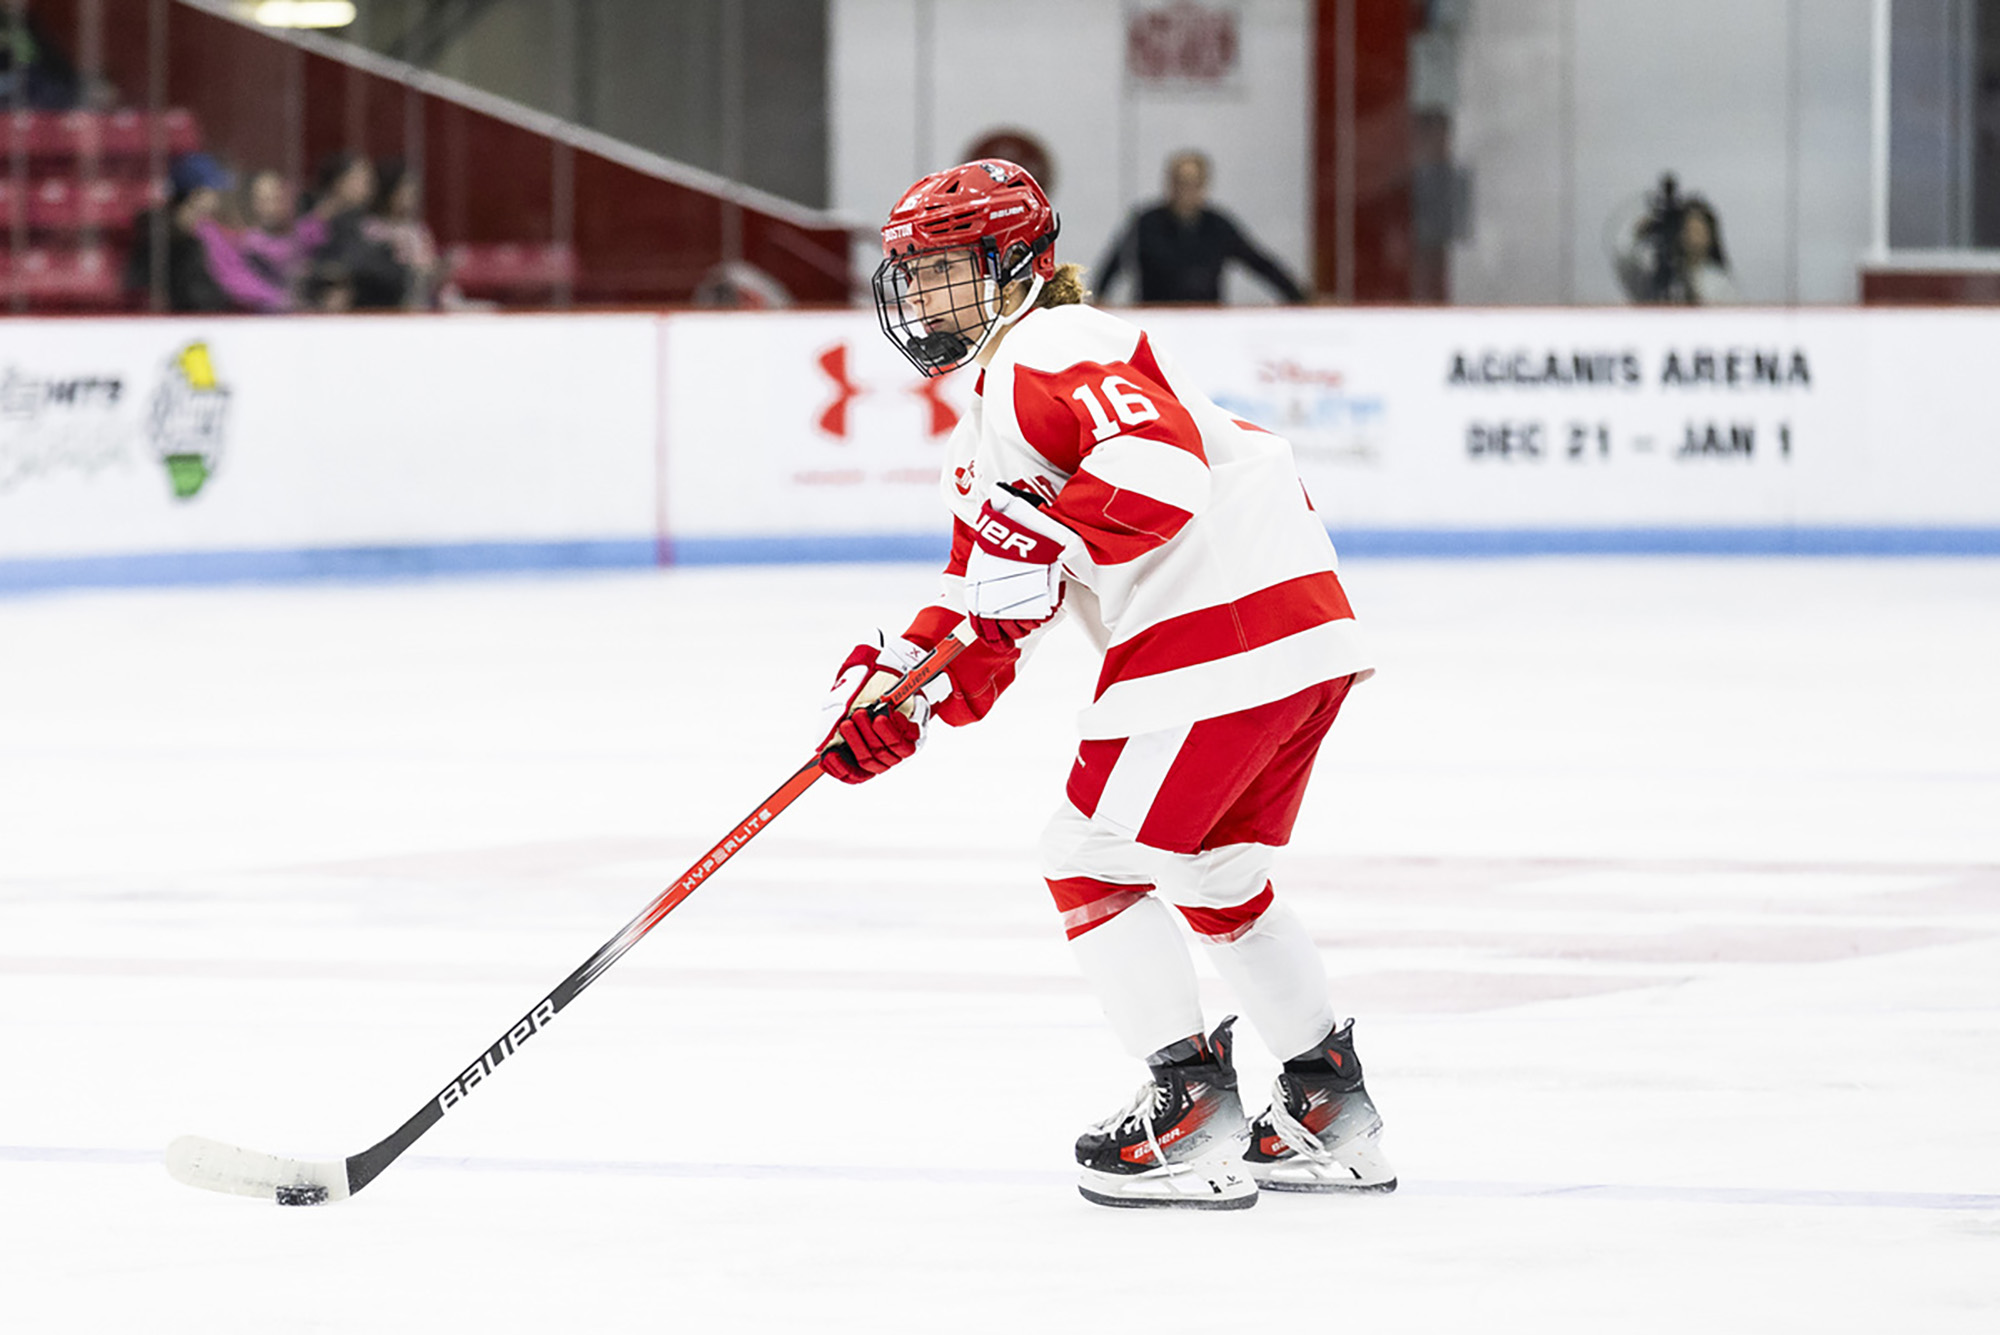 Photo: Luisa, a BU women's hockey player, skates with the puck in her BU uniform--white with red detailing and numbers.